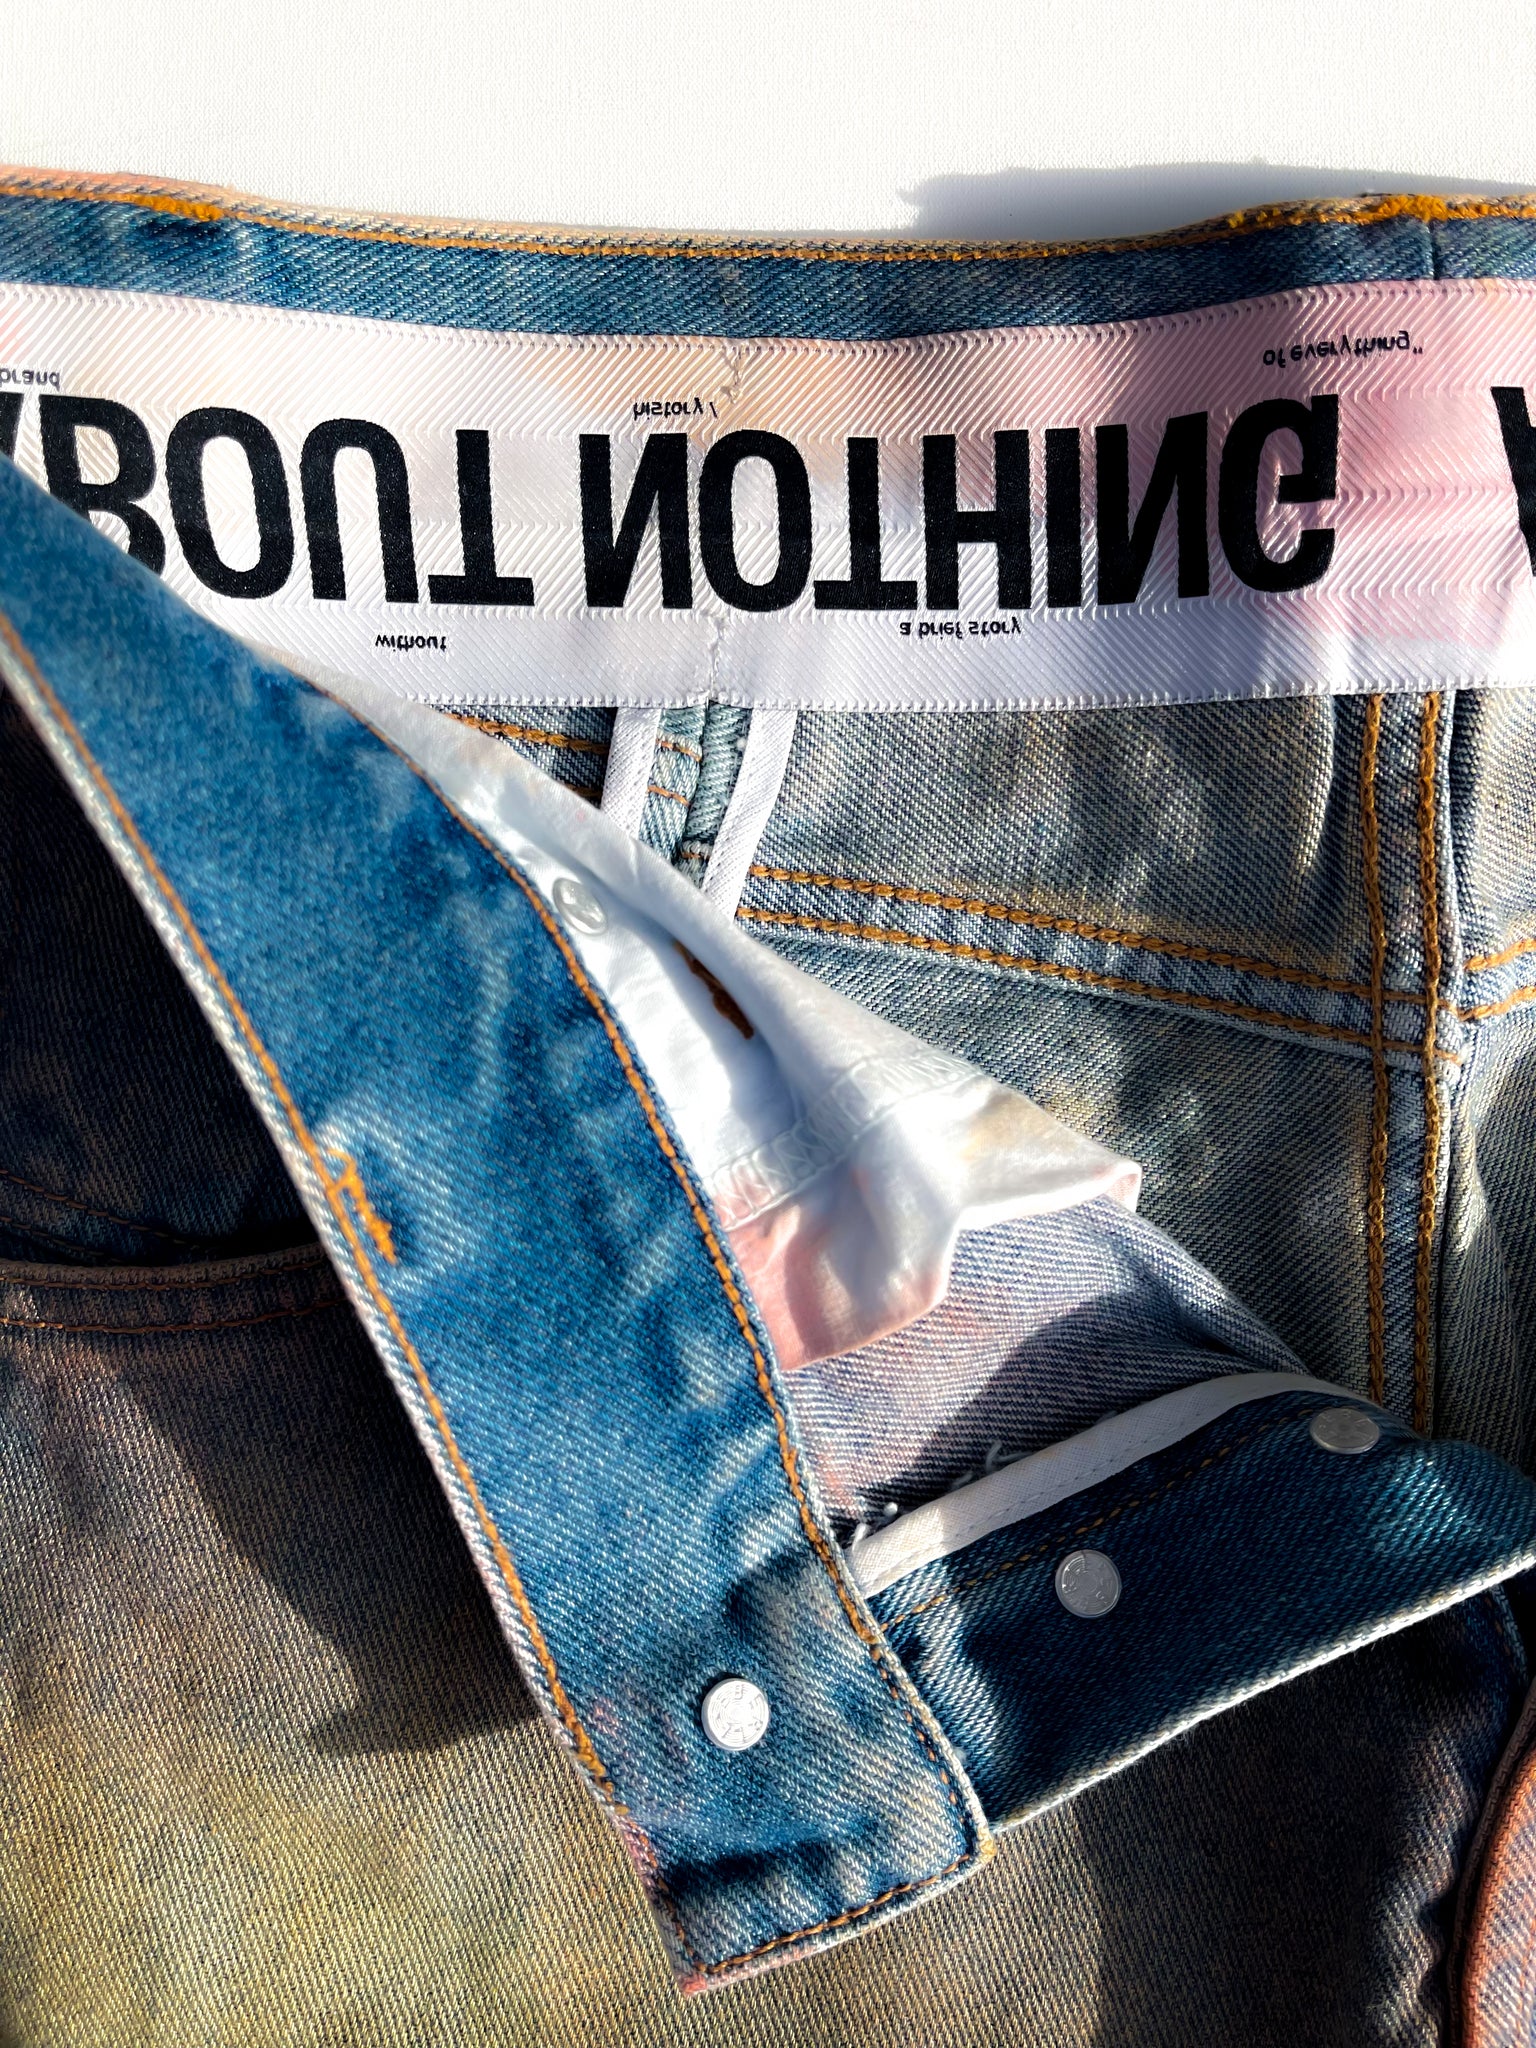 WORLDXIT x ABOUT NOTHING // 1 OF 1 ROCKSPORT JEANS D.05 [MEDIUM]